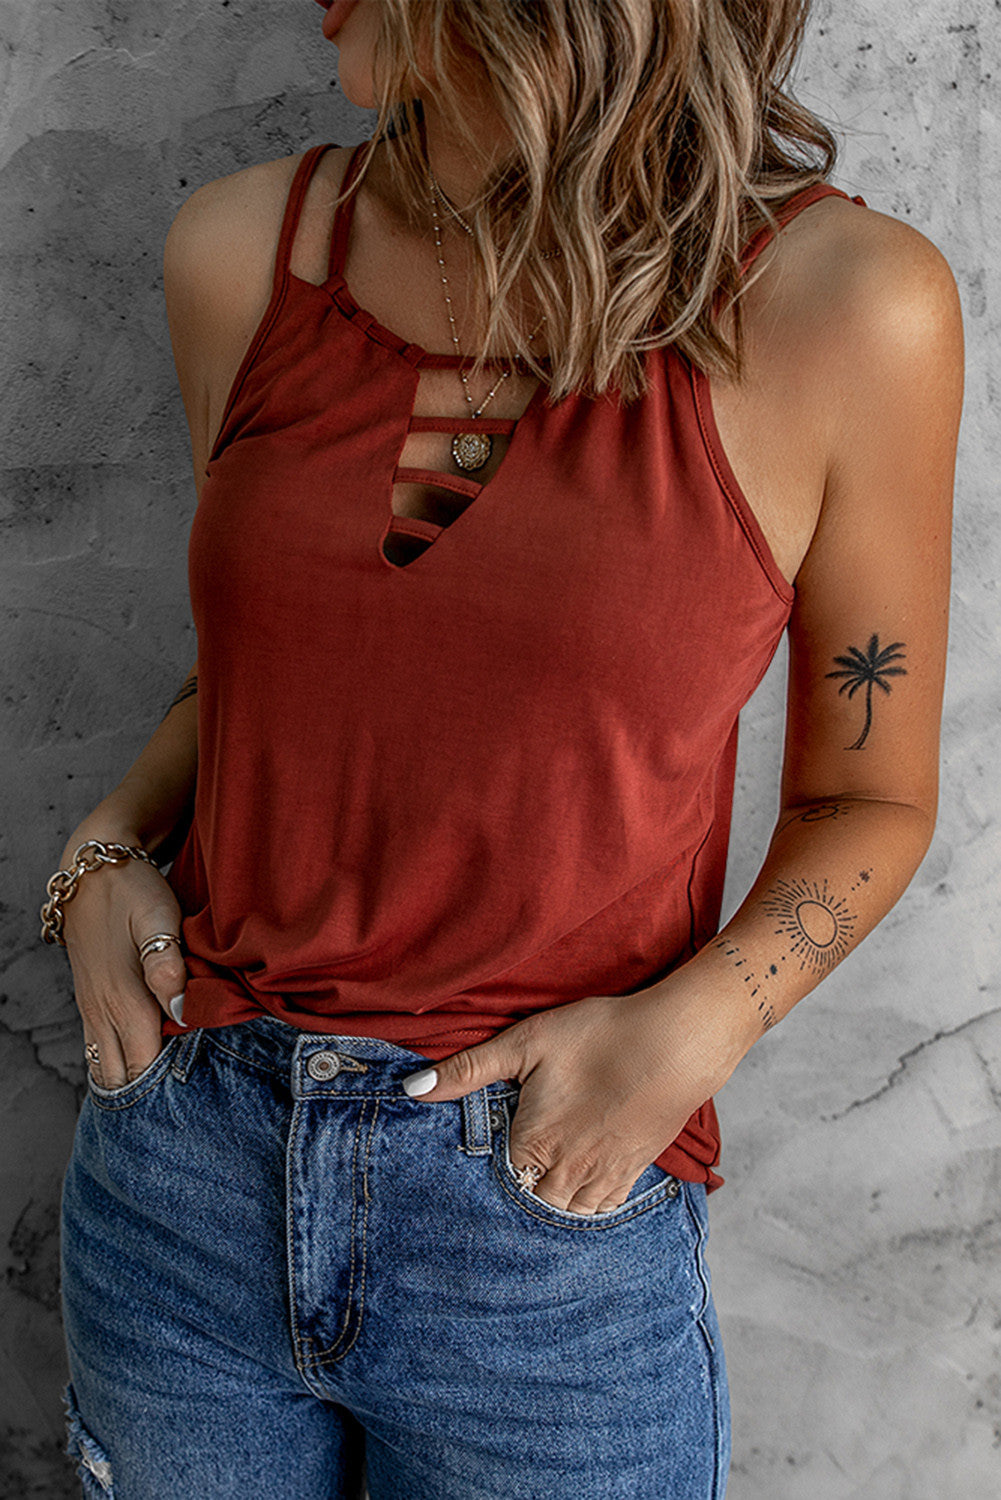 Red Ladder Hollow-out Tank Top Item NO.: 5122